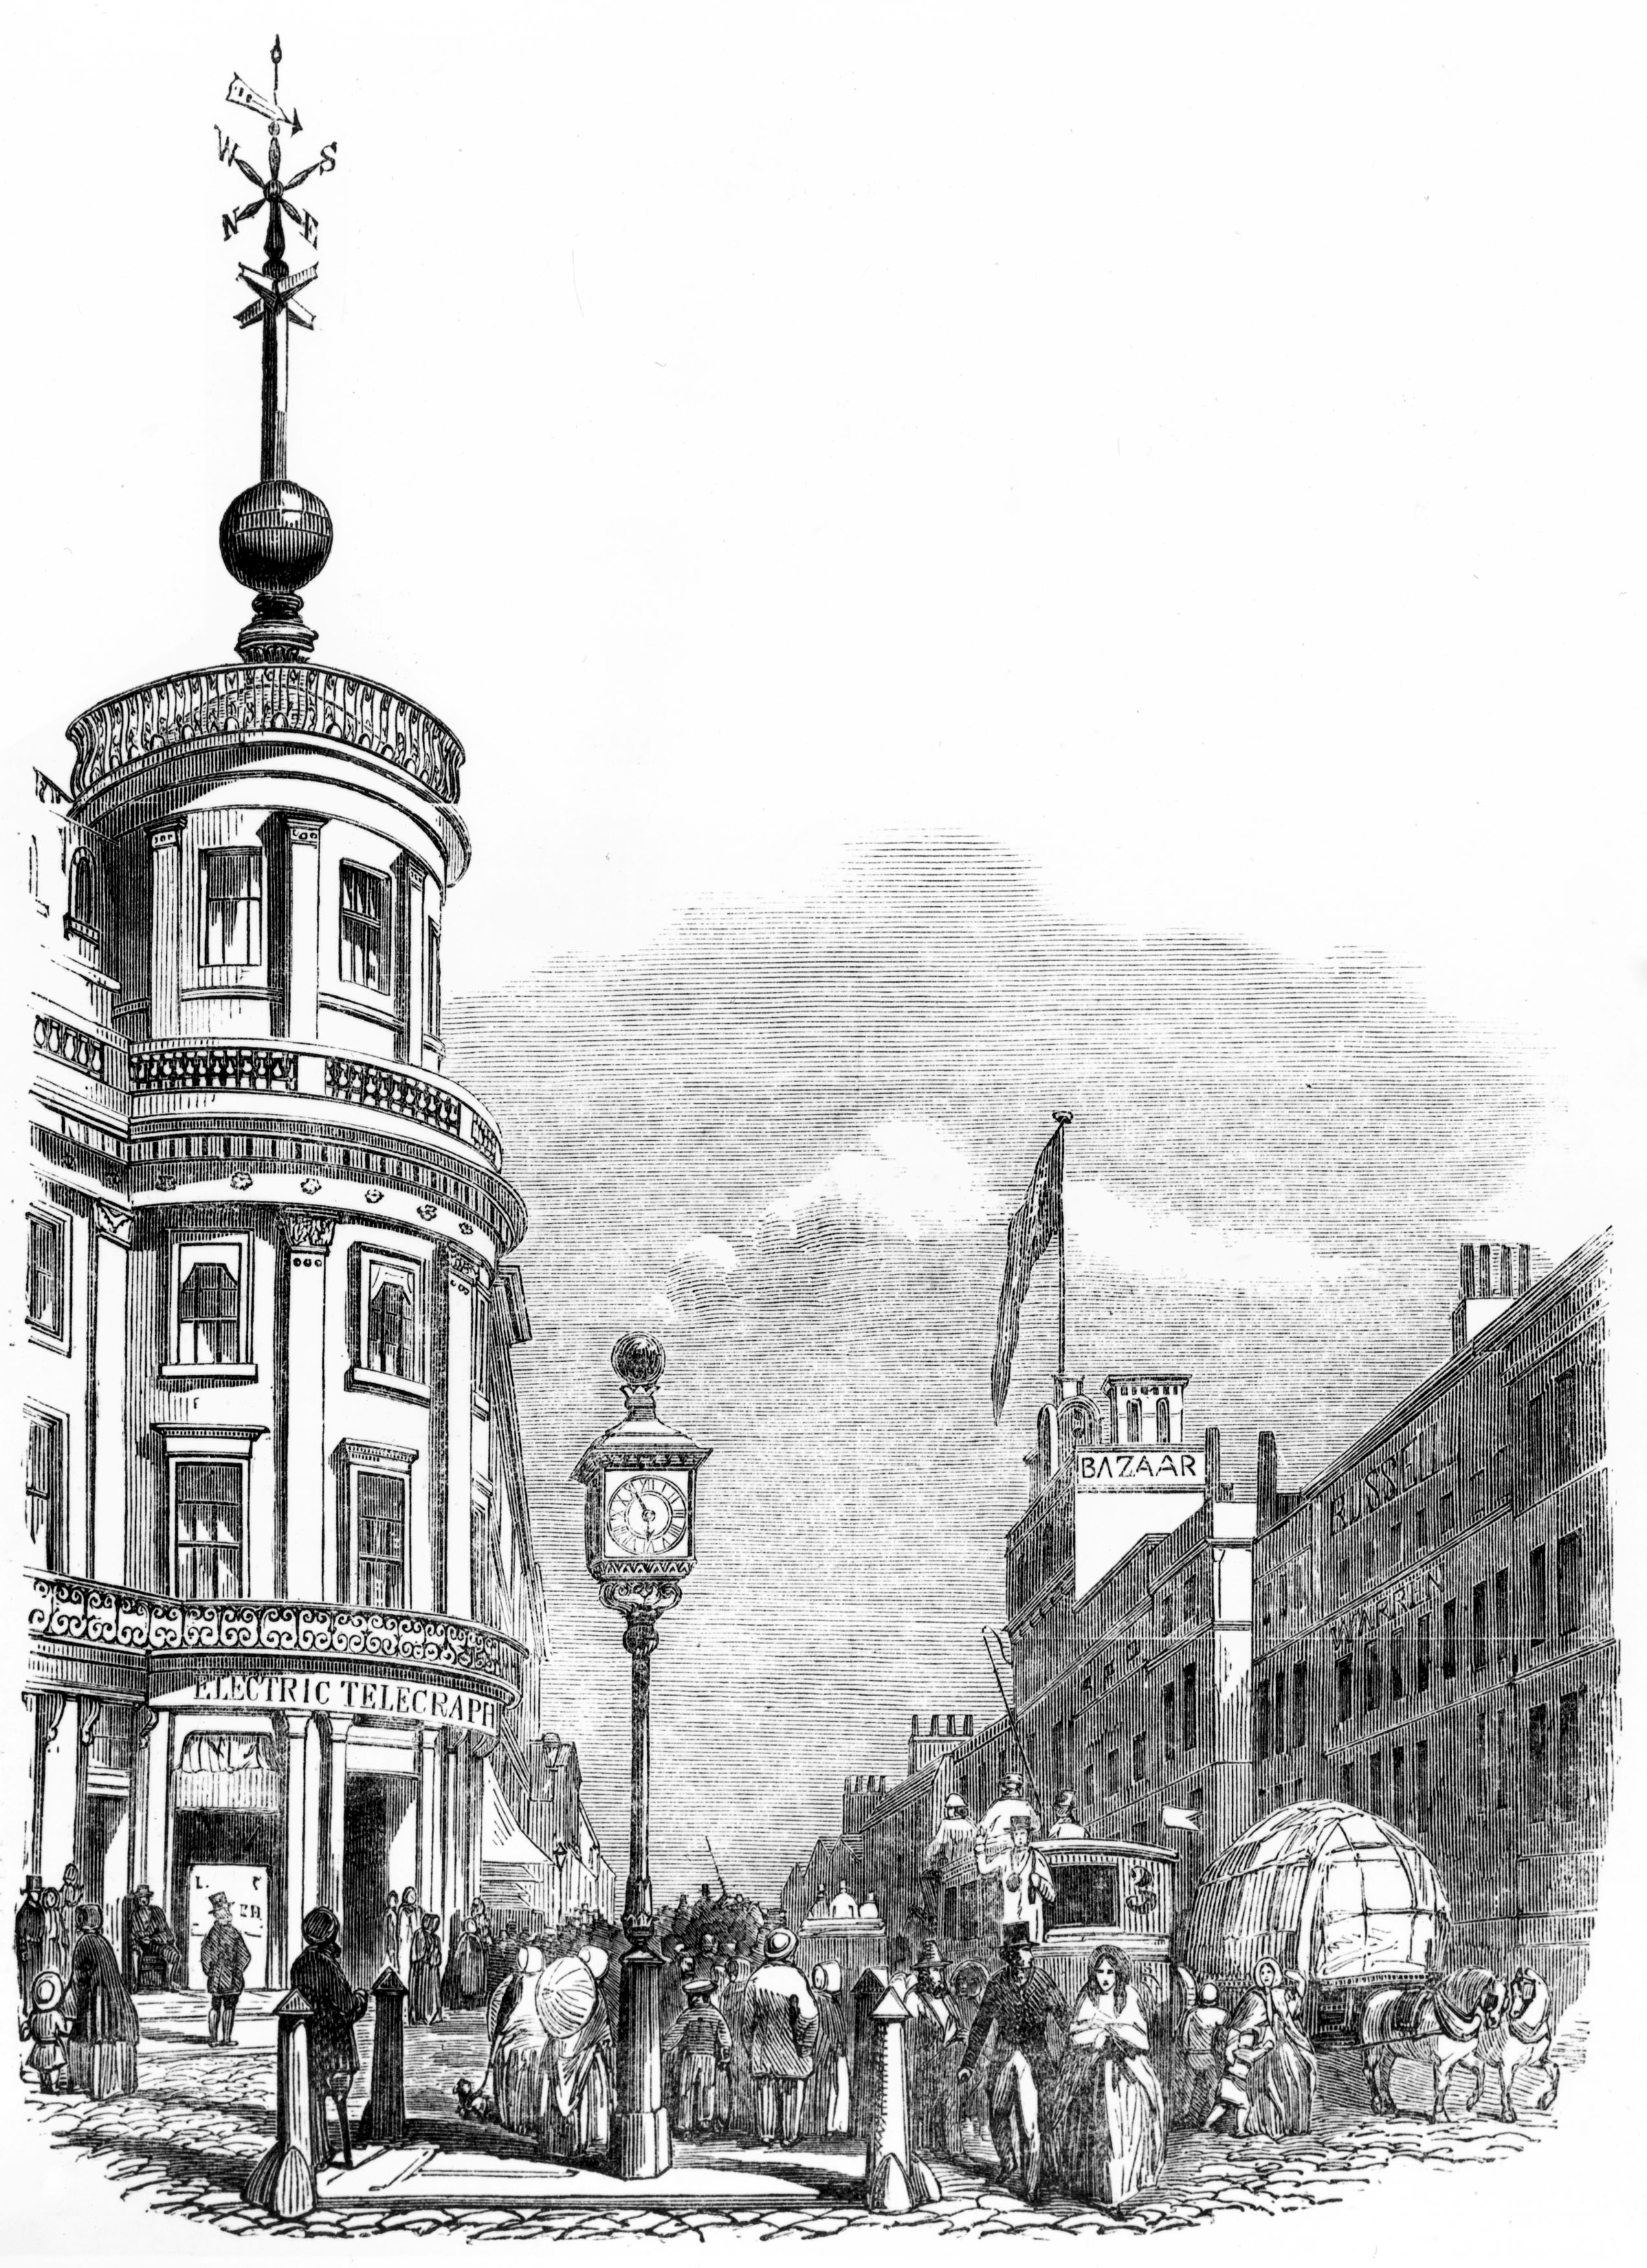 Engraving taken from the <i>Illustrated London News</i>. A master clock, verified each day by stellar observation, sent electric impulses to clocks throughout the country via the growing network of telegraph wires providing for public and railway use. The time ball at the Strand received the impulses hourly from the Central Telegraphy Station of the Electric Telegraph Company. (SSPL—Getty Images)